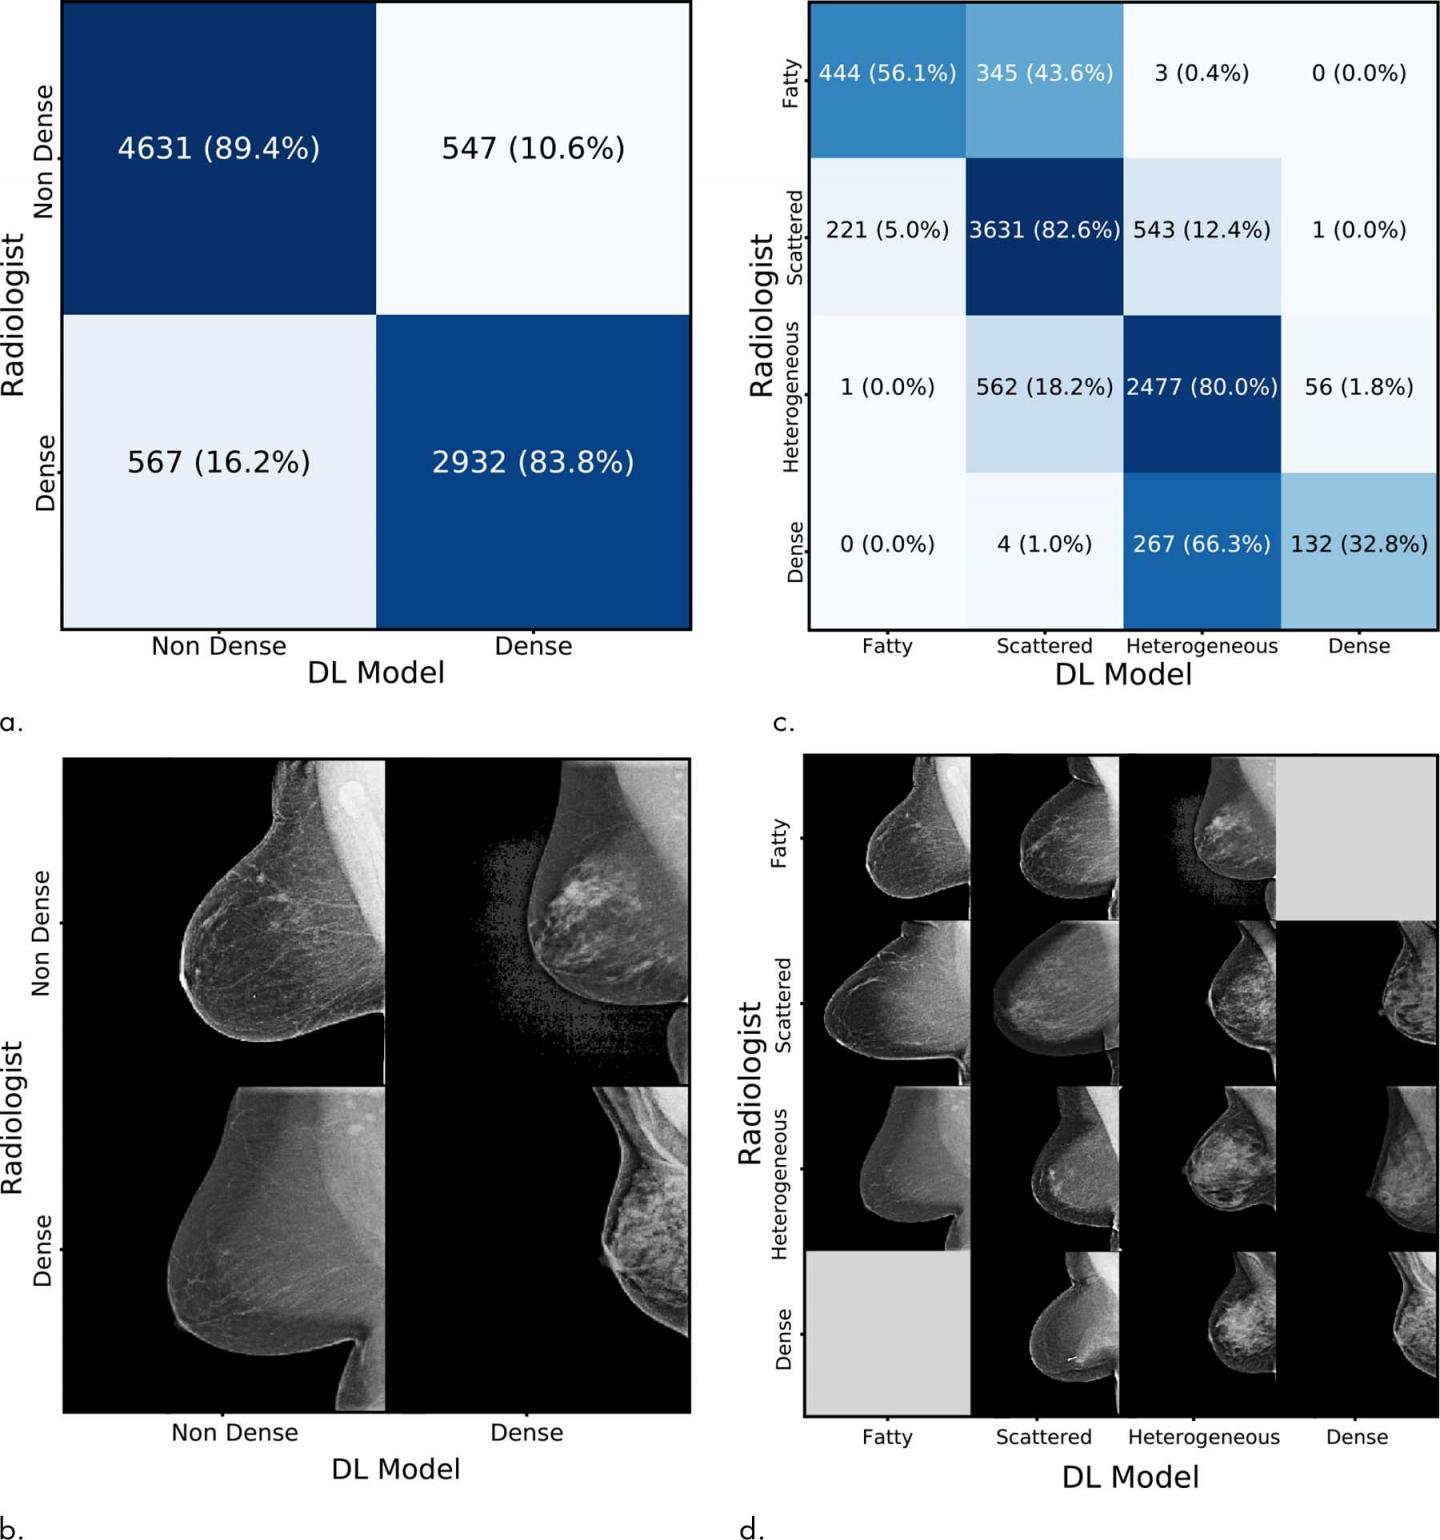 Comparison of the Original Interpreting Radiologist Assessment with the Deep Learning Model Assessme